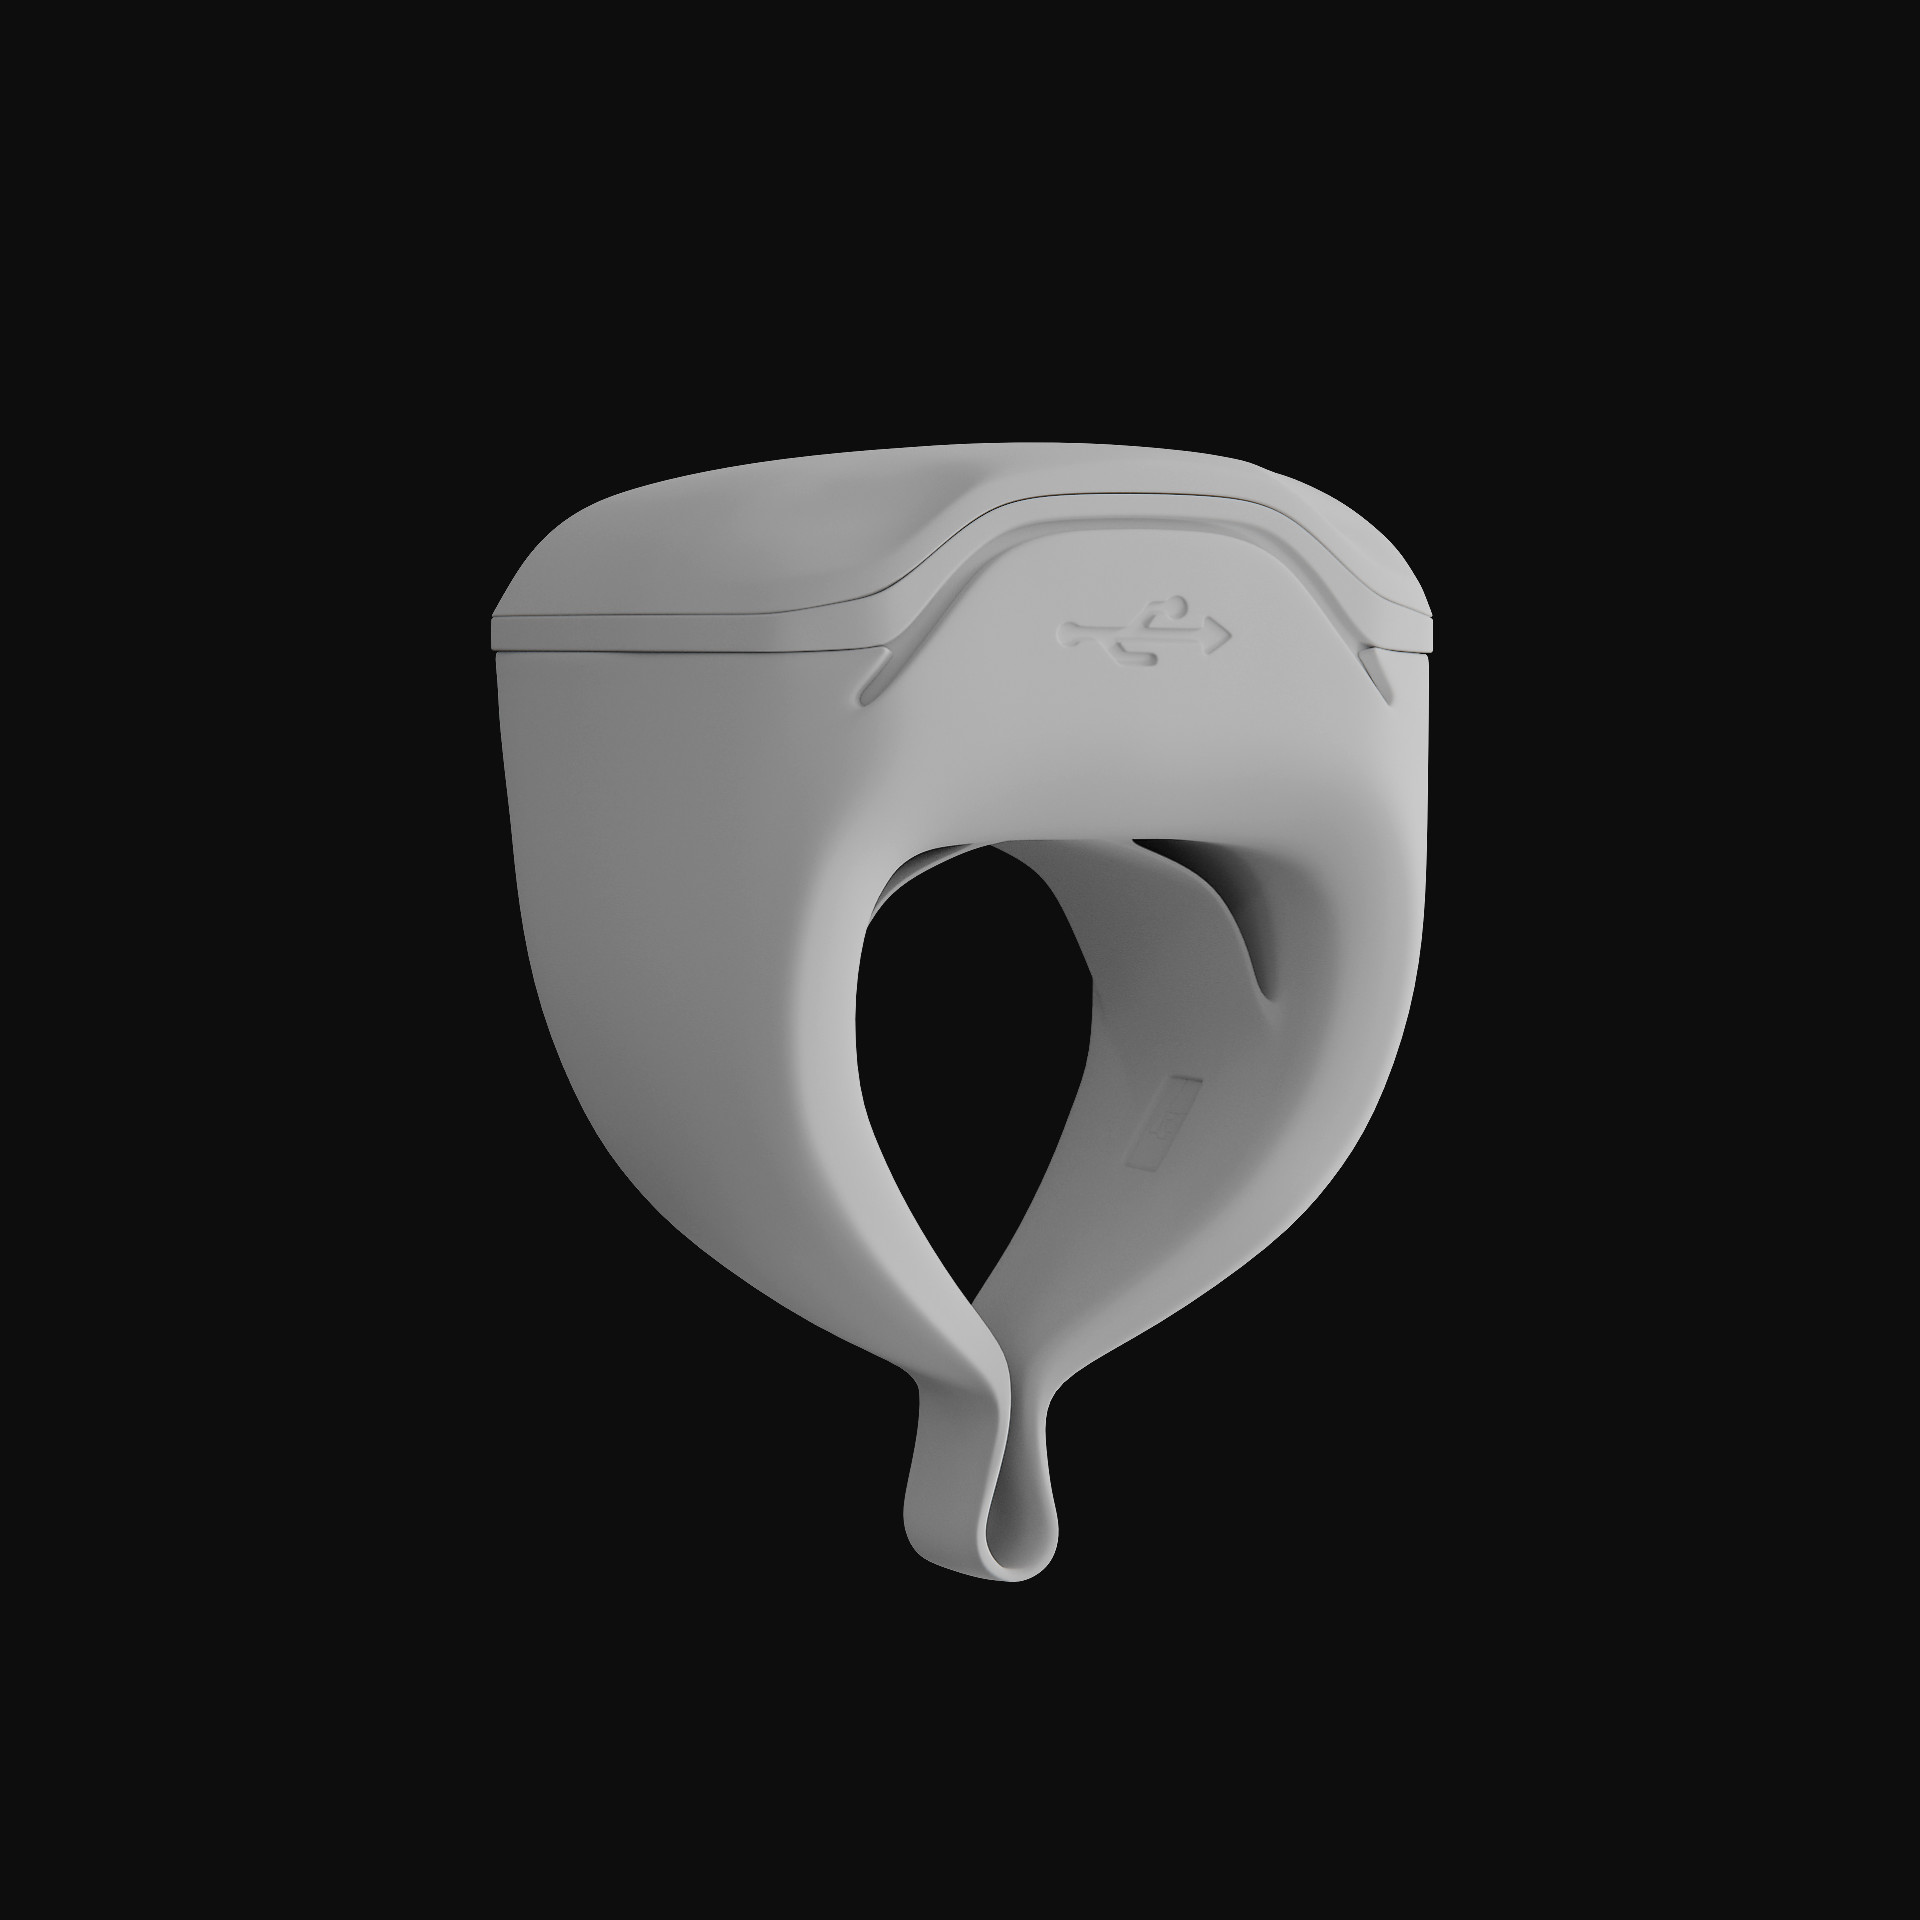 Clay 01 - 3D product visualization for Sleep Image Ring - Sonny Nguyen